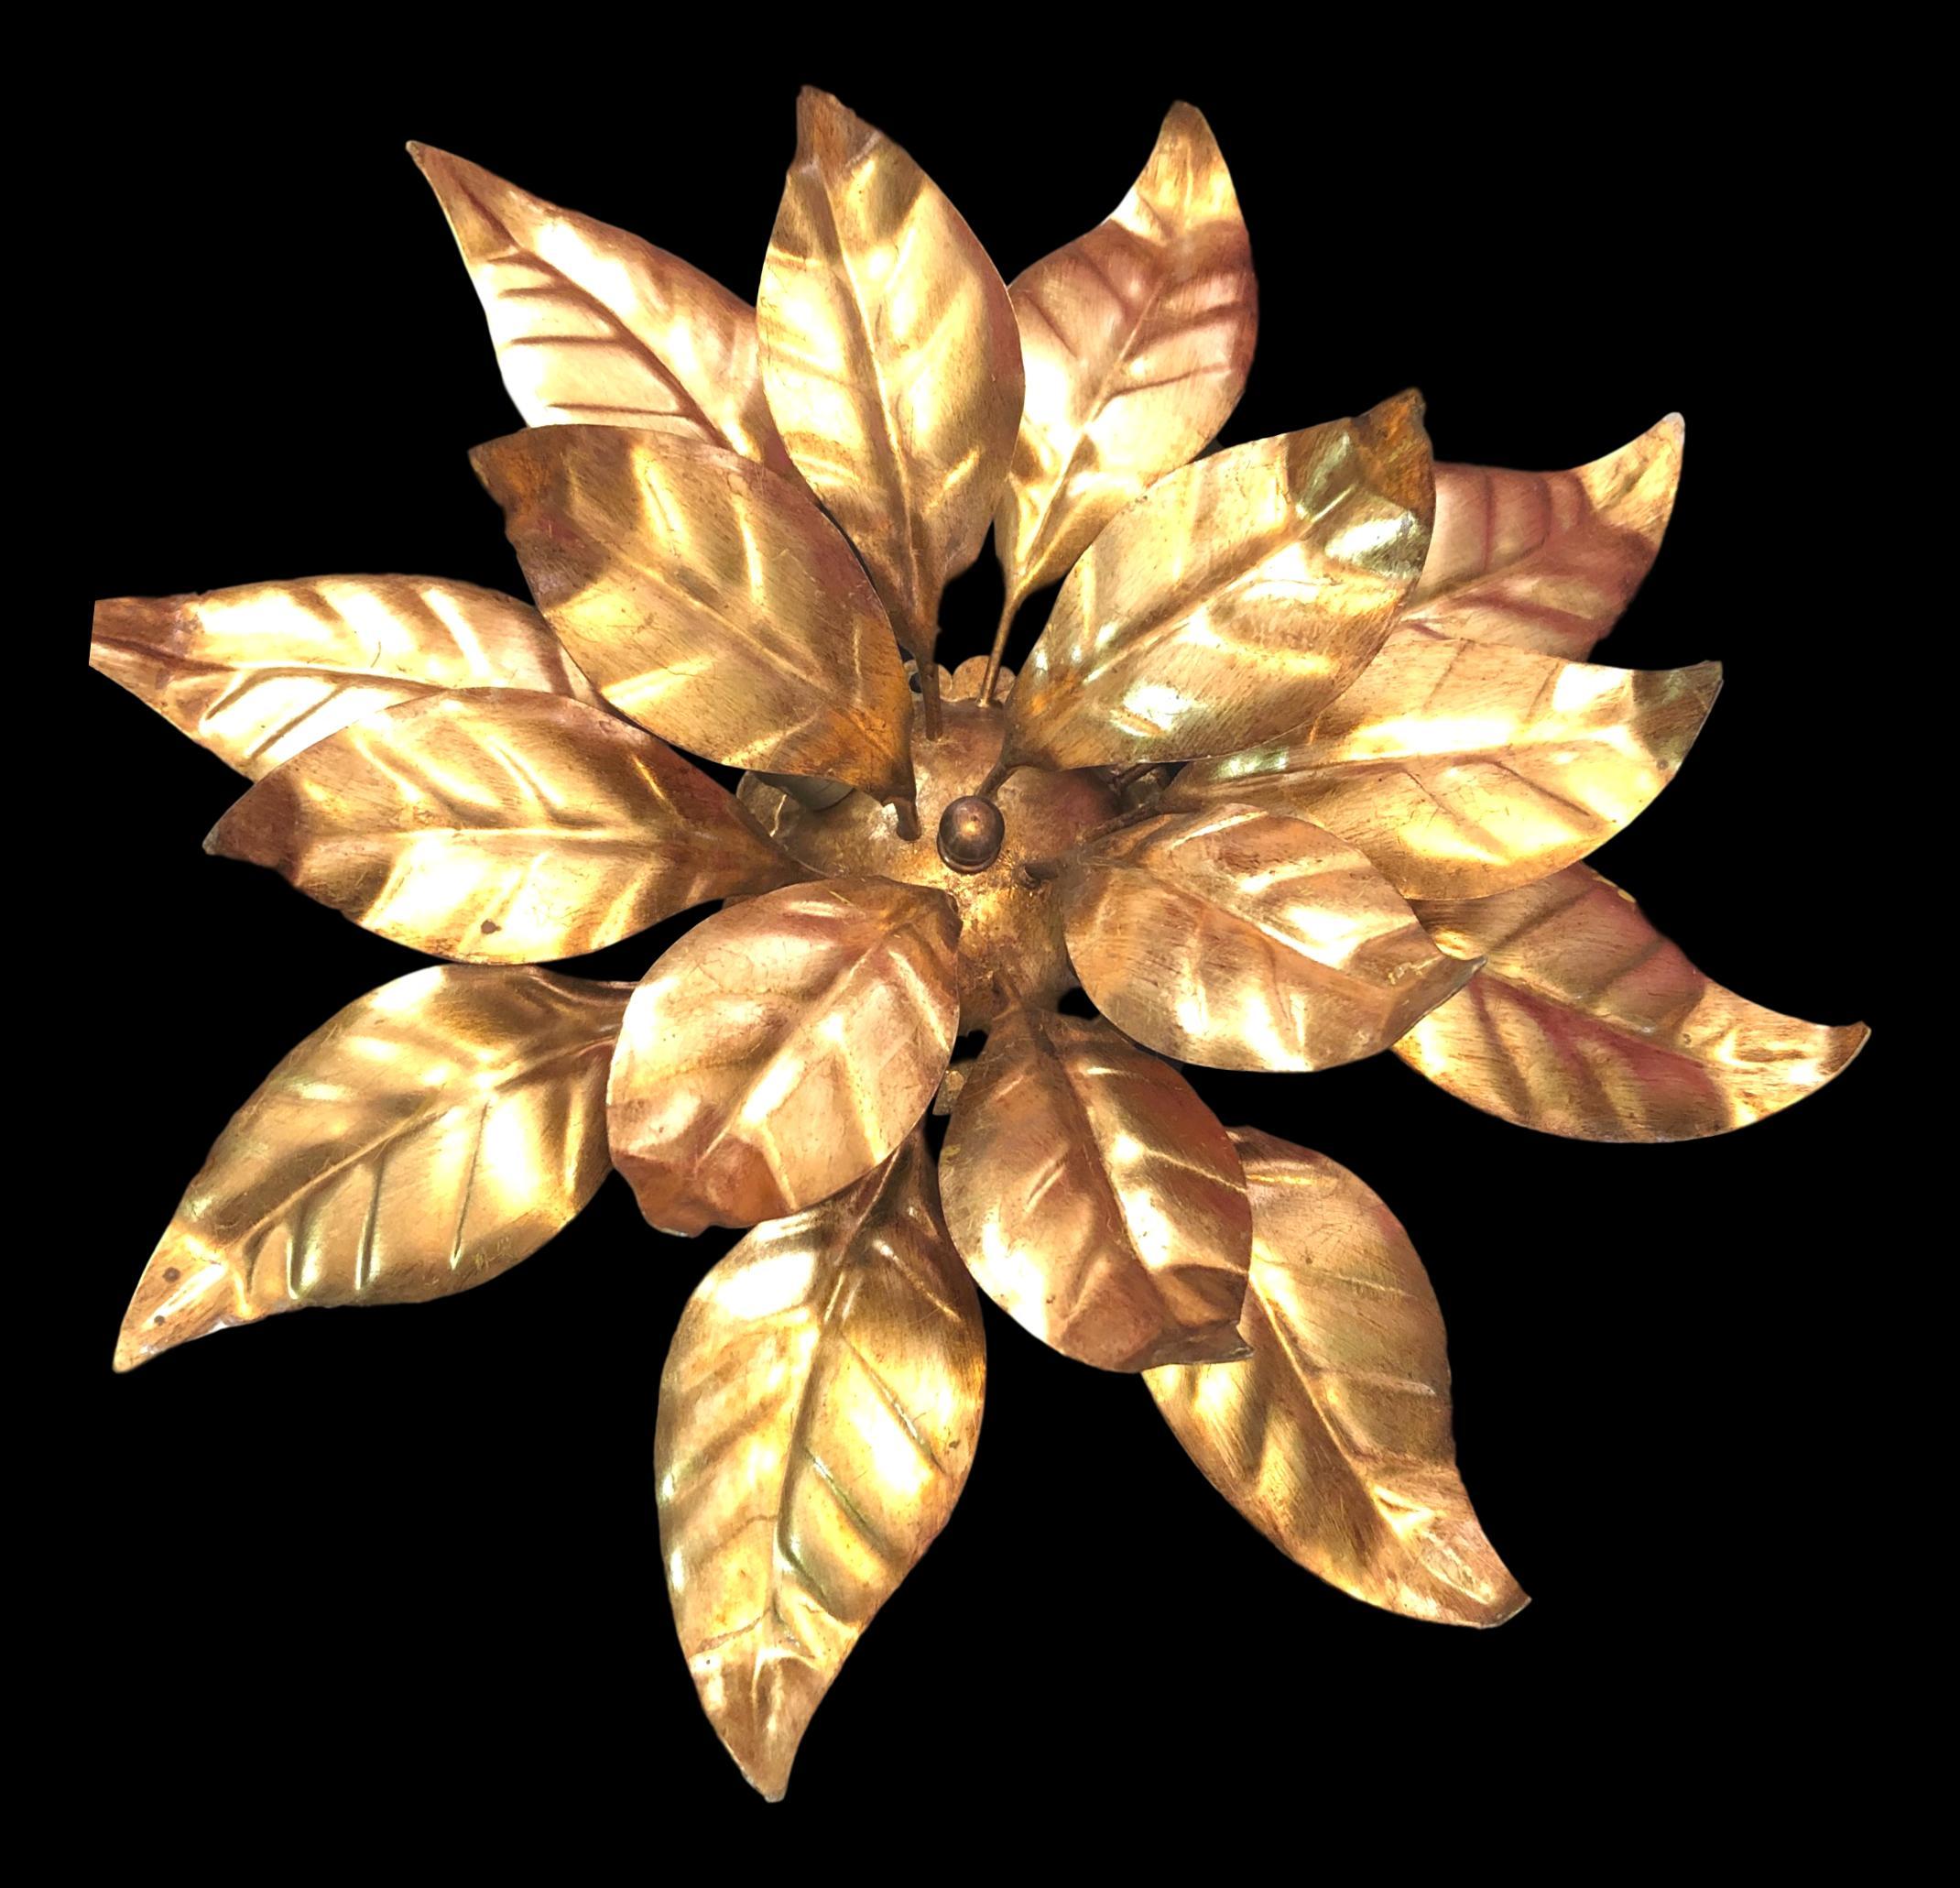 Add a touch of opulence to your home with this charming flush mount. Perfect gilt metal leafs to enhance any chic or eclectic home. We'd love to see it hanging in an entryway as a charming welcome home. Built in the 1960s, attributed to Koegel